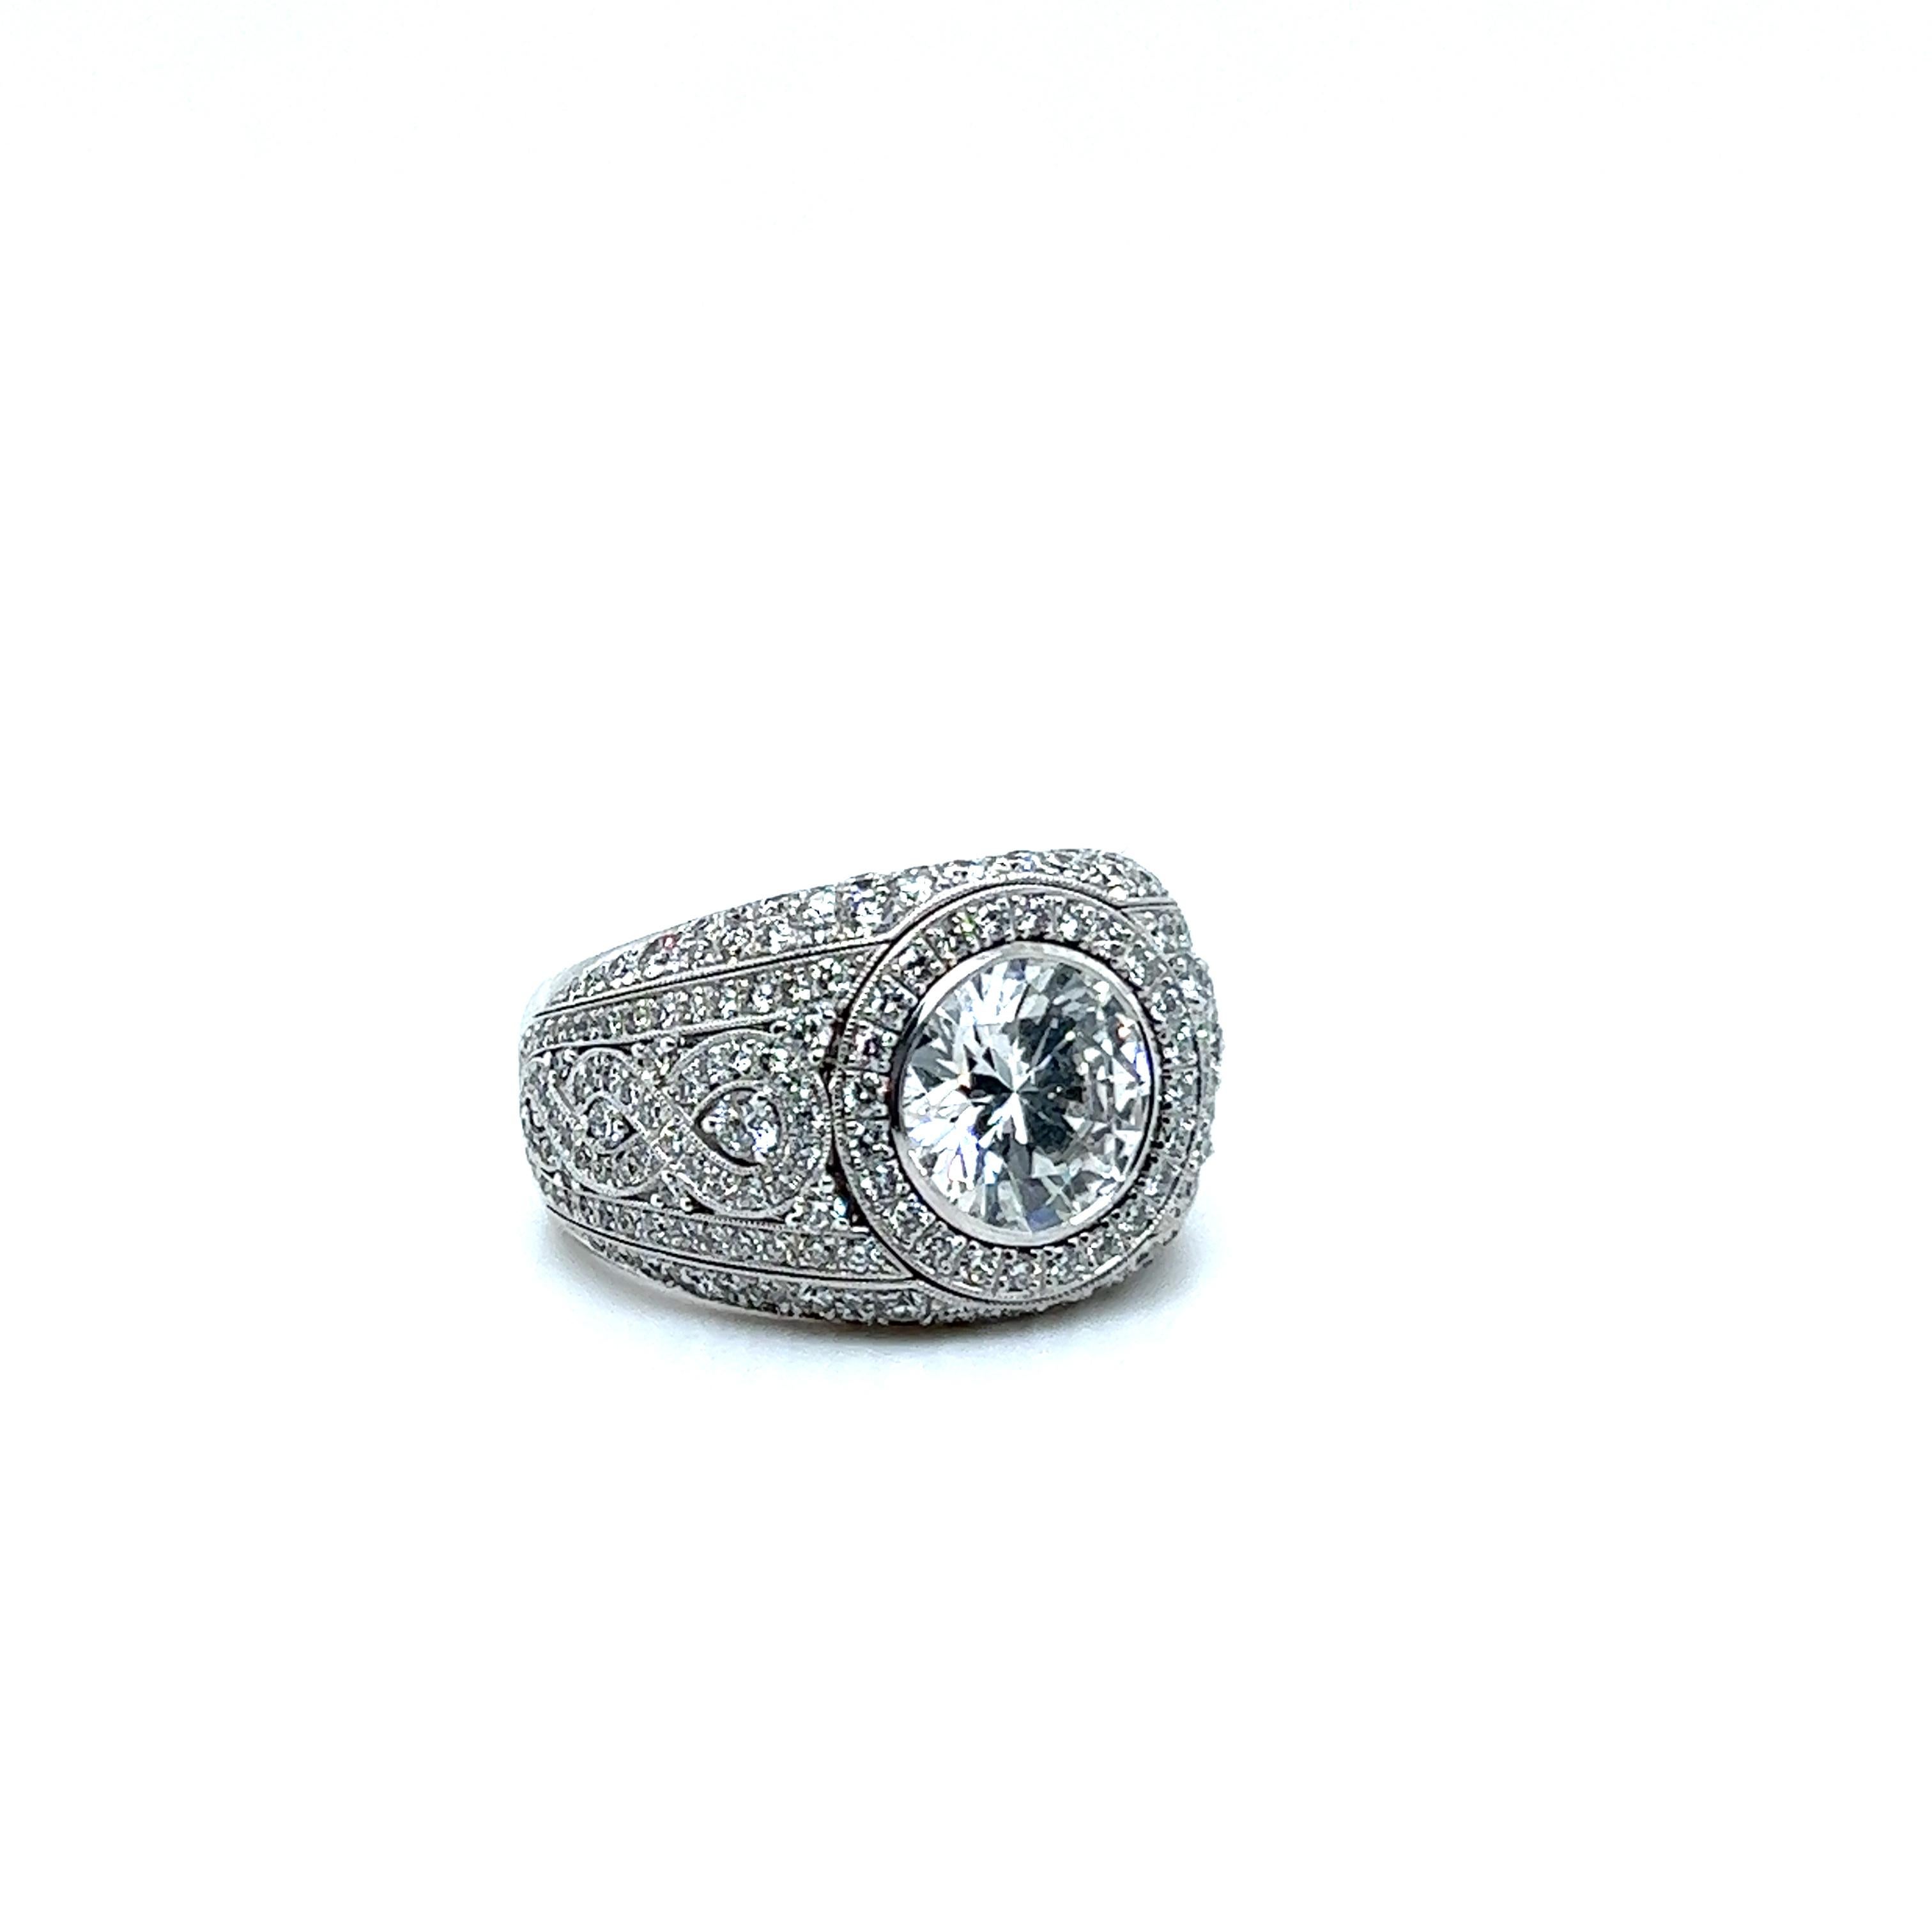 Modern GIA Certified 2.69 Carat Diamond Ring in Platinum by Péclard For Sale